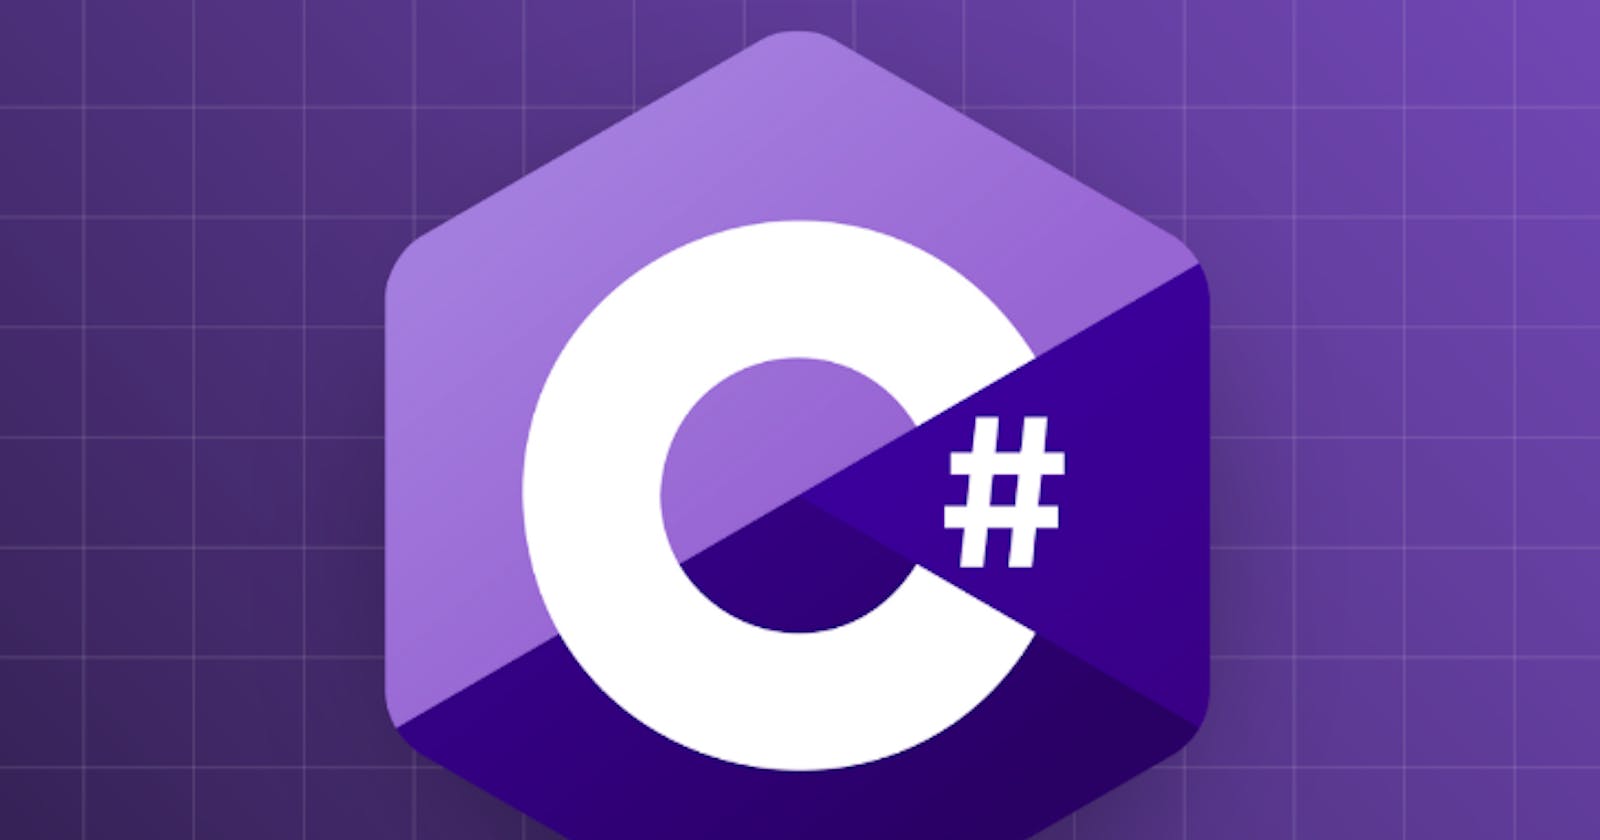 How Powerful Is C#?